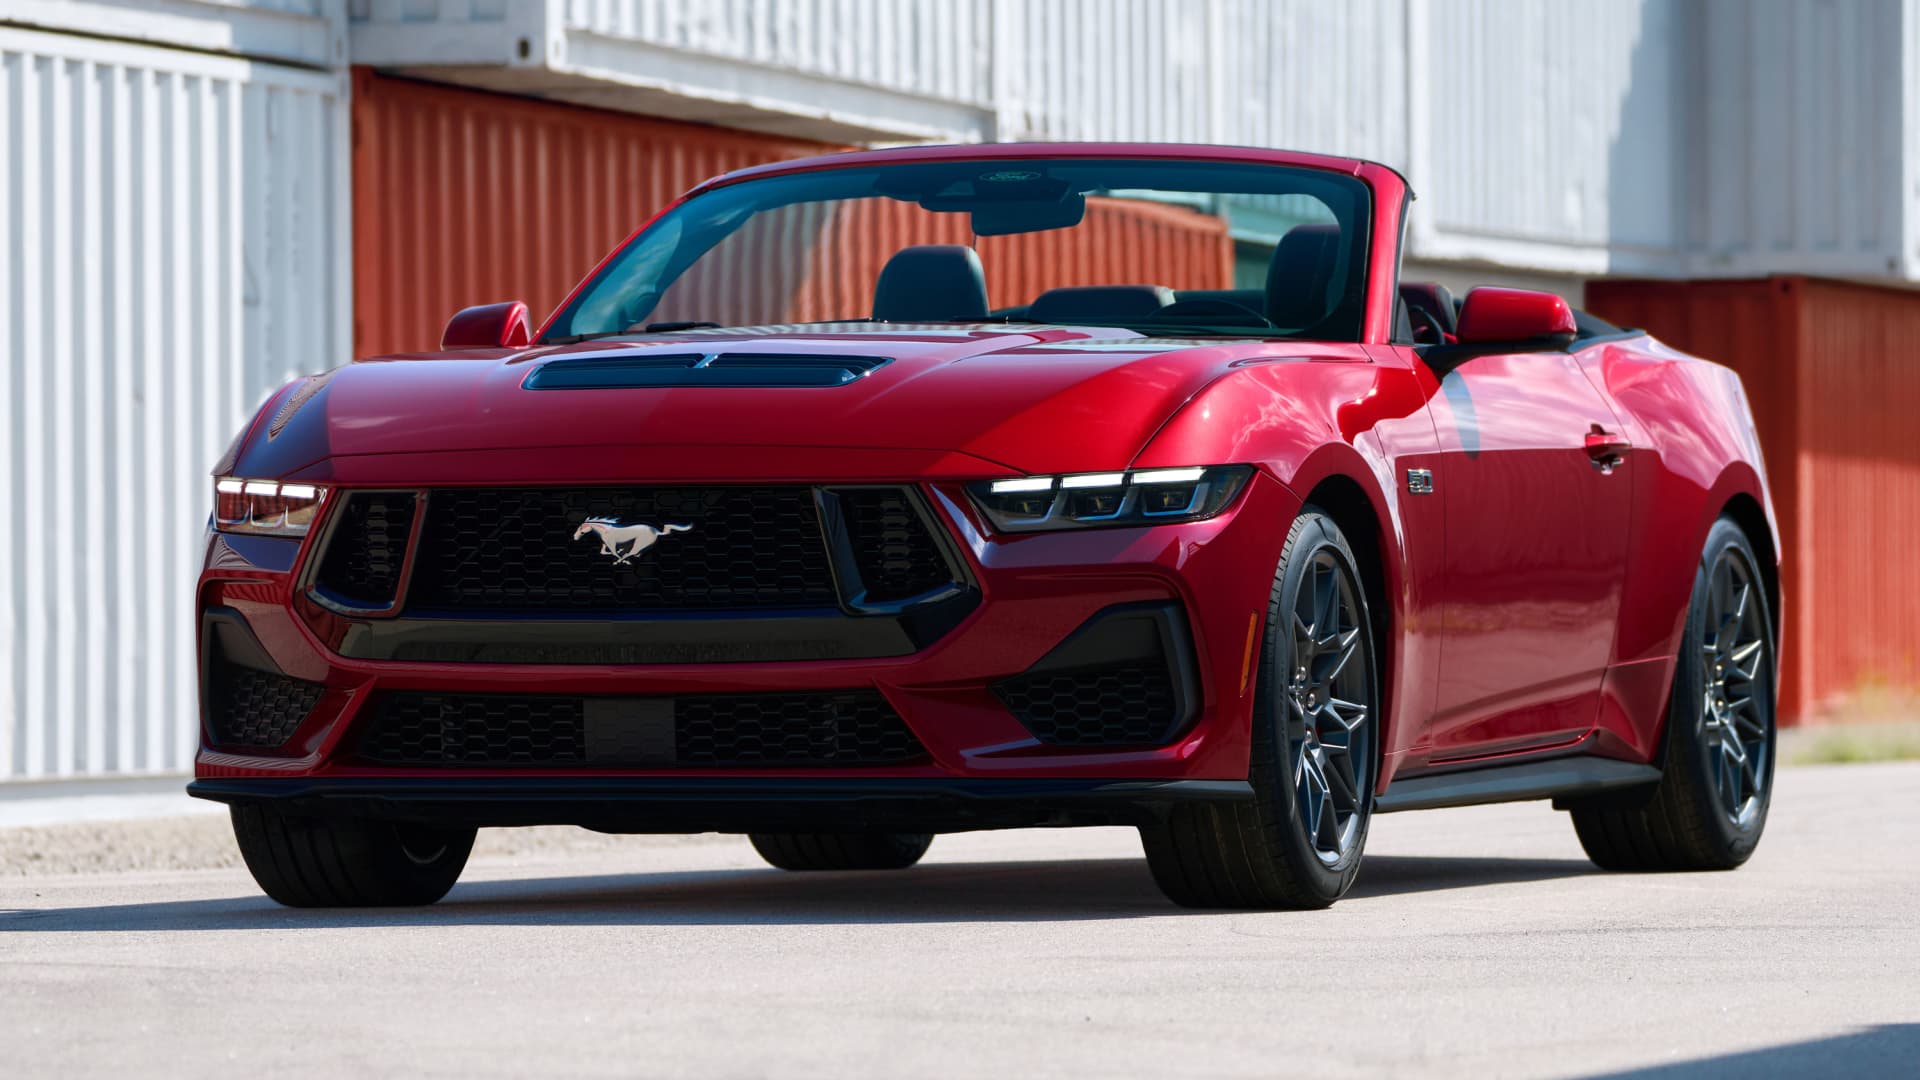 Ford unveils new gas-powered Mustang, while muscle car rivals go electric